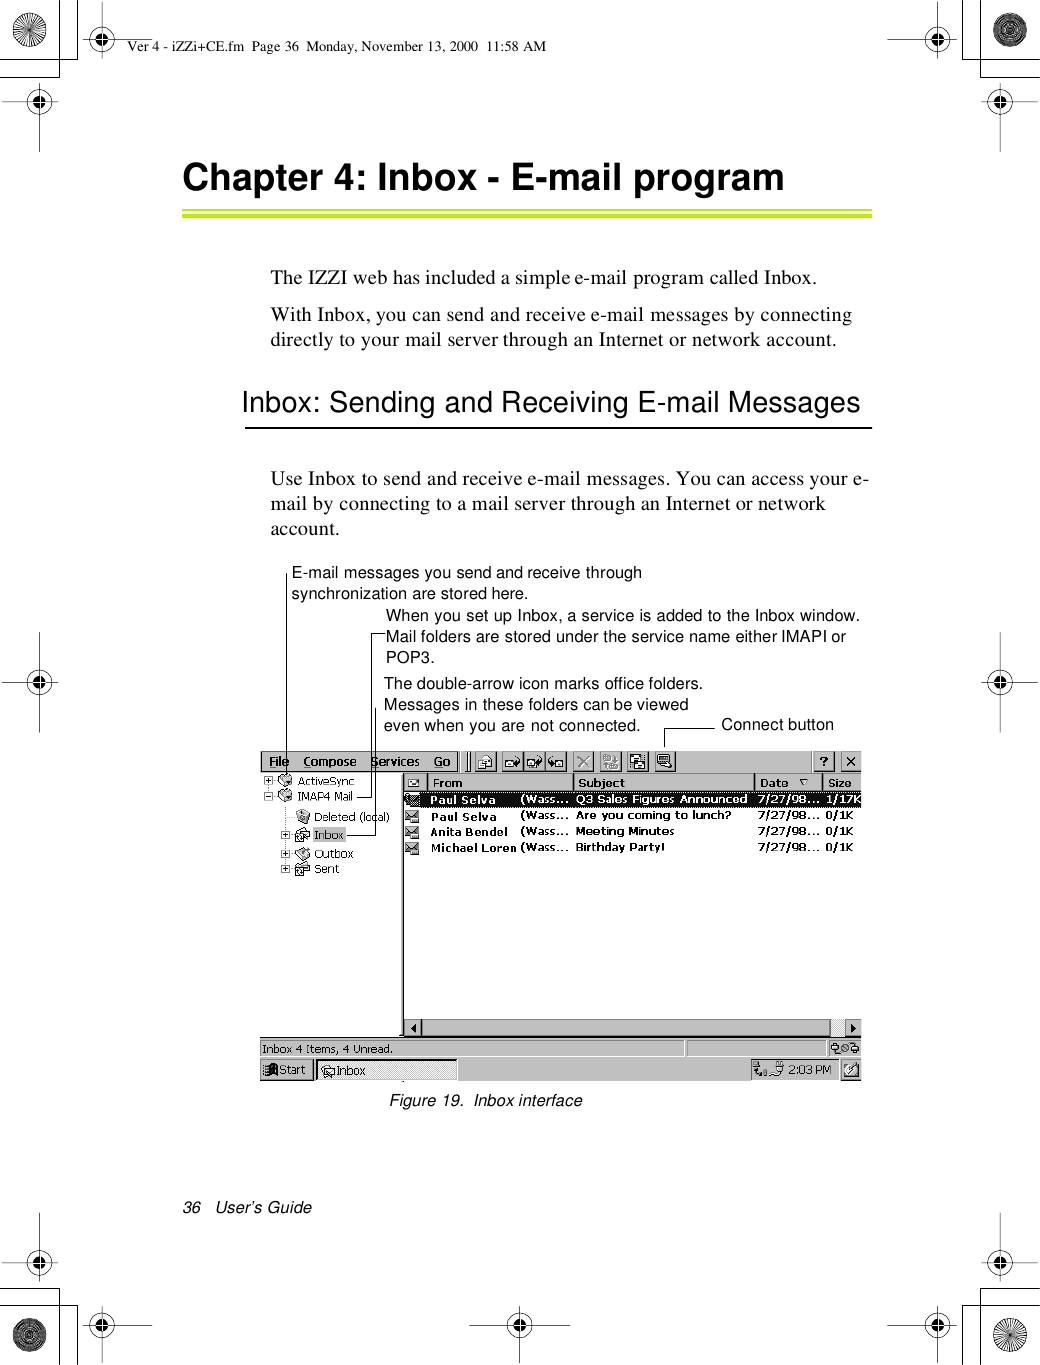 36 User’s GuideChapter 4: Inbox-E-mail programThe IZZI web has included a simple e-mail program called Inbox.With Inbox, you can send and receive e-mail messages by connectingdirectly to your mail server through an Internet or network account.Inbox: Sending and Receiving E-mail MessagesUse Inbox to send and receive e-mail messages. You can access your e-mail by connecting to a mail server through an Internet or networkaccount.Figure 19. Inbox interfaceE-mail messages you send and receive throughsynchronization are stored here.When you set up Inbox, a service is added to the Inbox window.Mail folders are stored under the service name either IMAPI orPOP3.The double-arrow icon marks office folders.Messages in these folders can be viewedeven when you are not connected. Connect buttonVer 4 - iZZi+CE.fm Page 36 Monday, November 13, 2000 11:58 AM